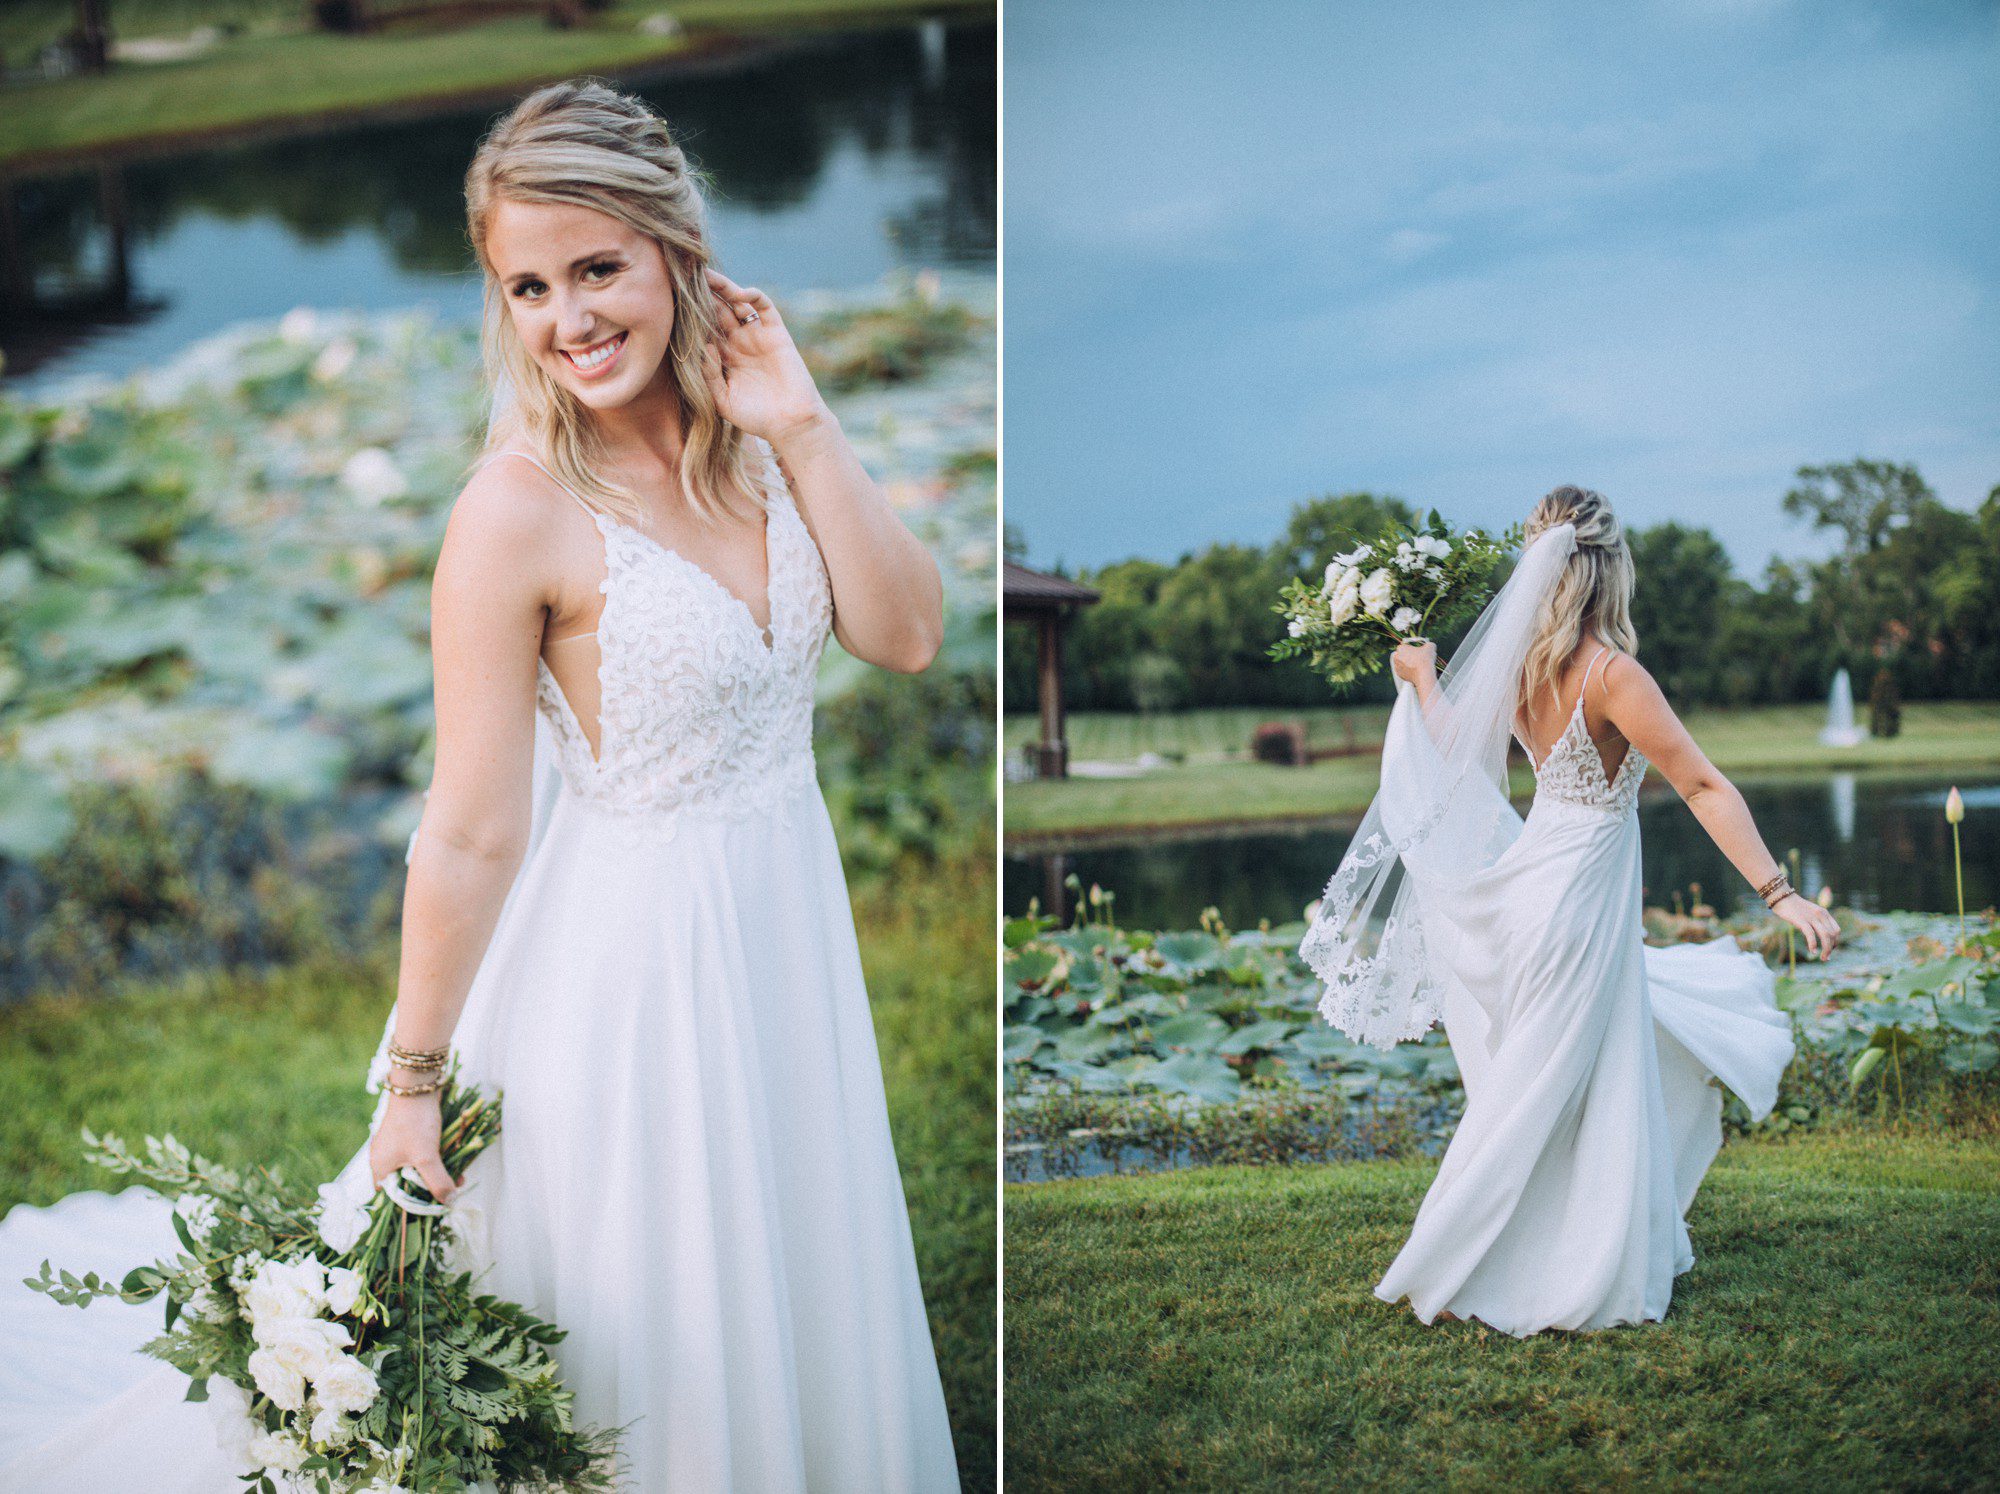 Bridal portrait with water garden pond at The Barn at Sycamore Farms Arrington, TN